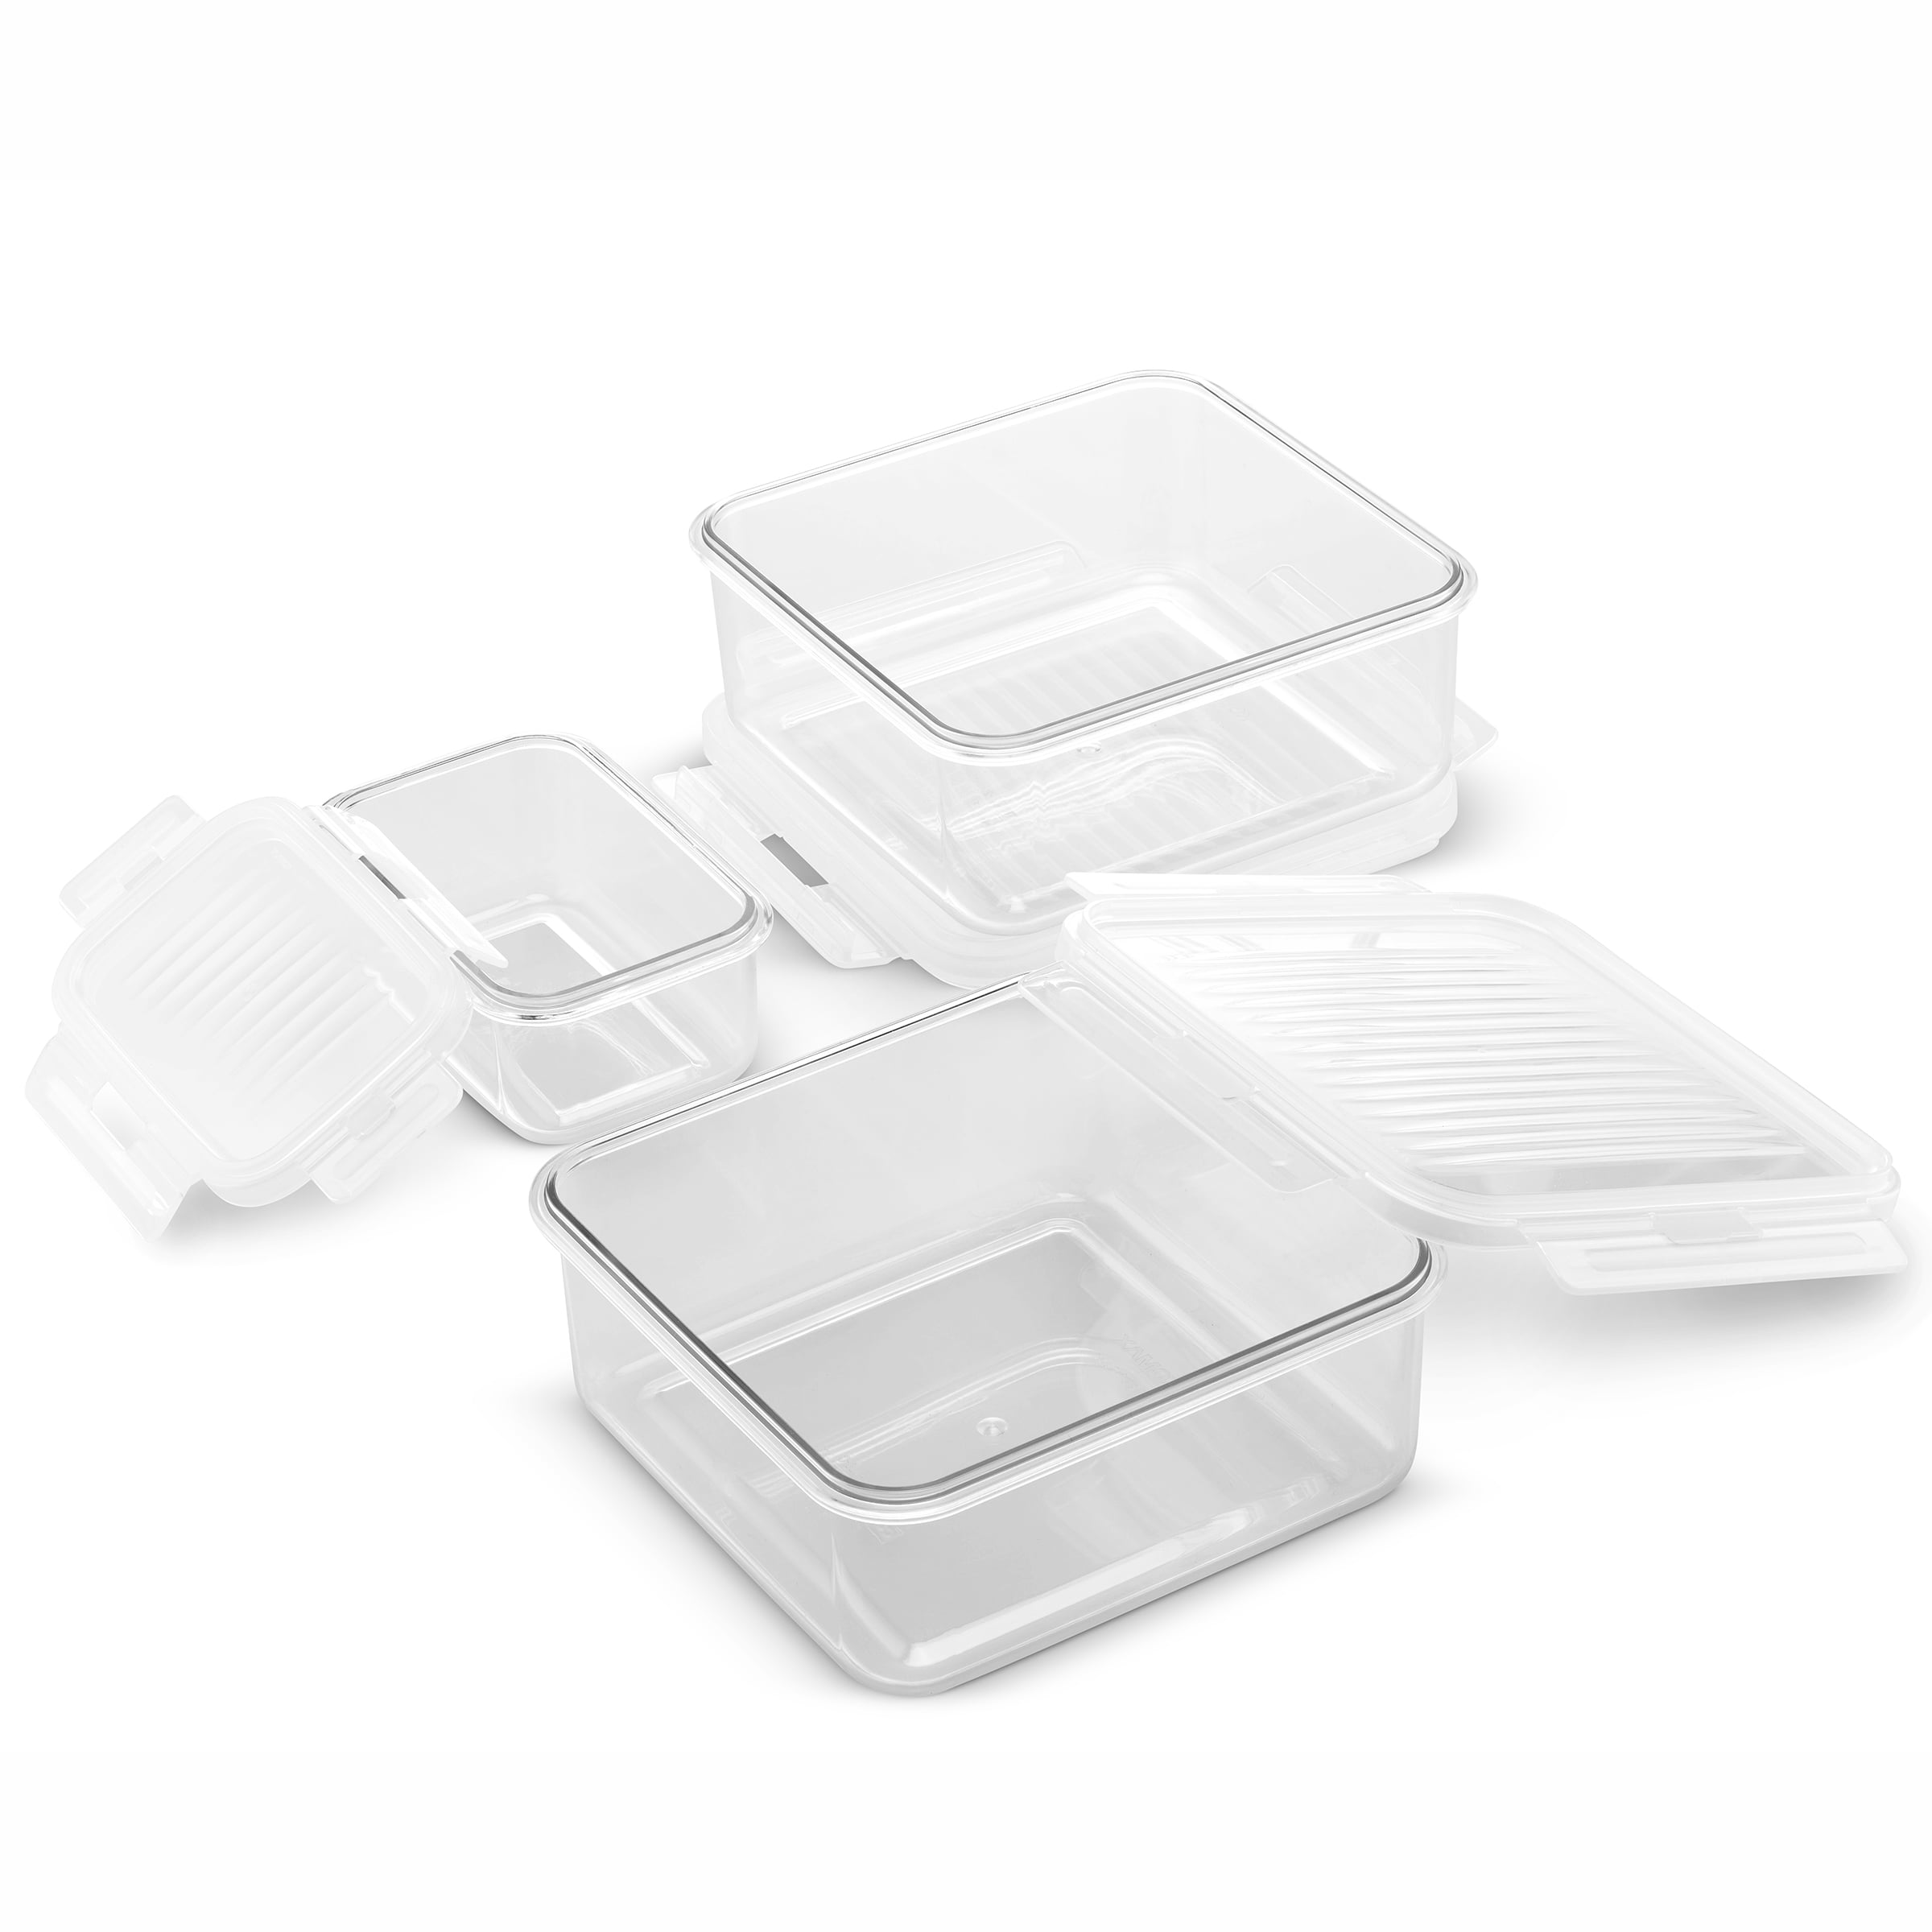 Komax Hikips Food Storage Containers for Deli Meats [2-Pack]